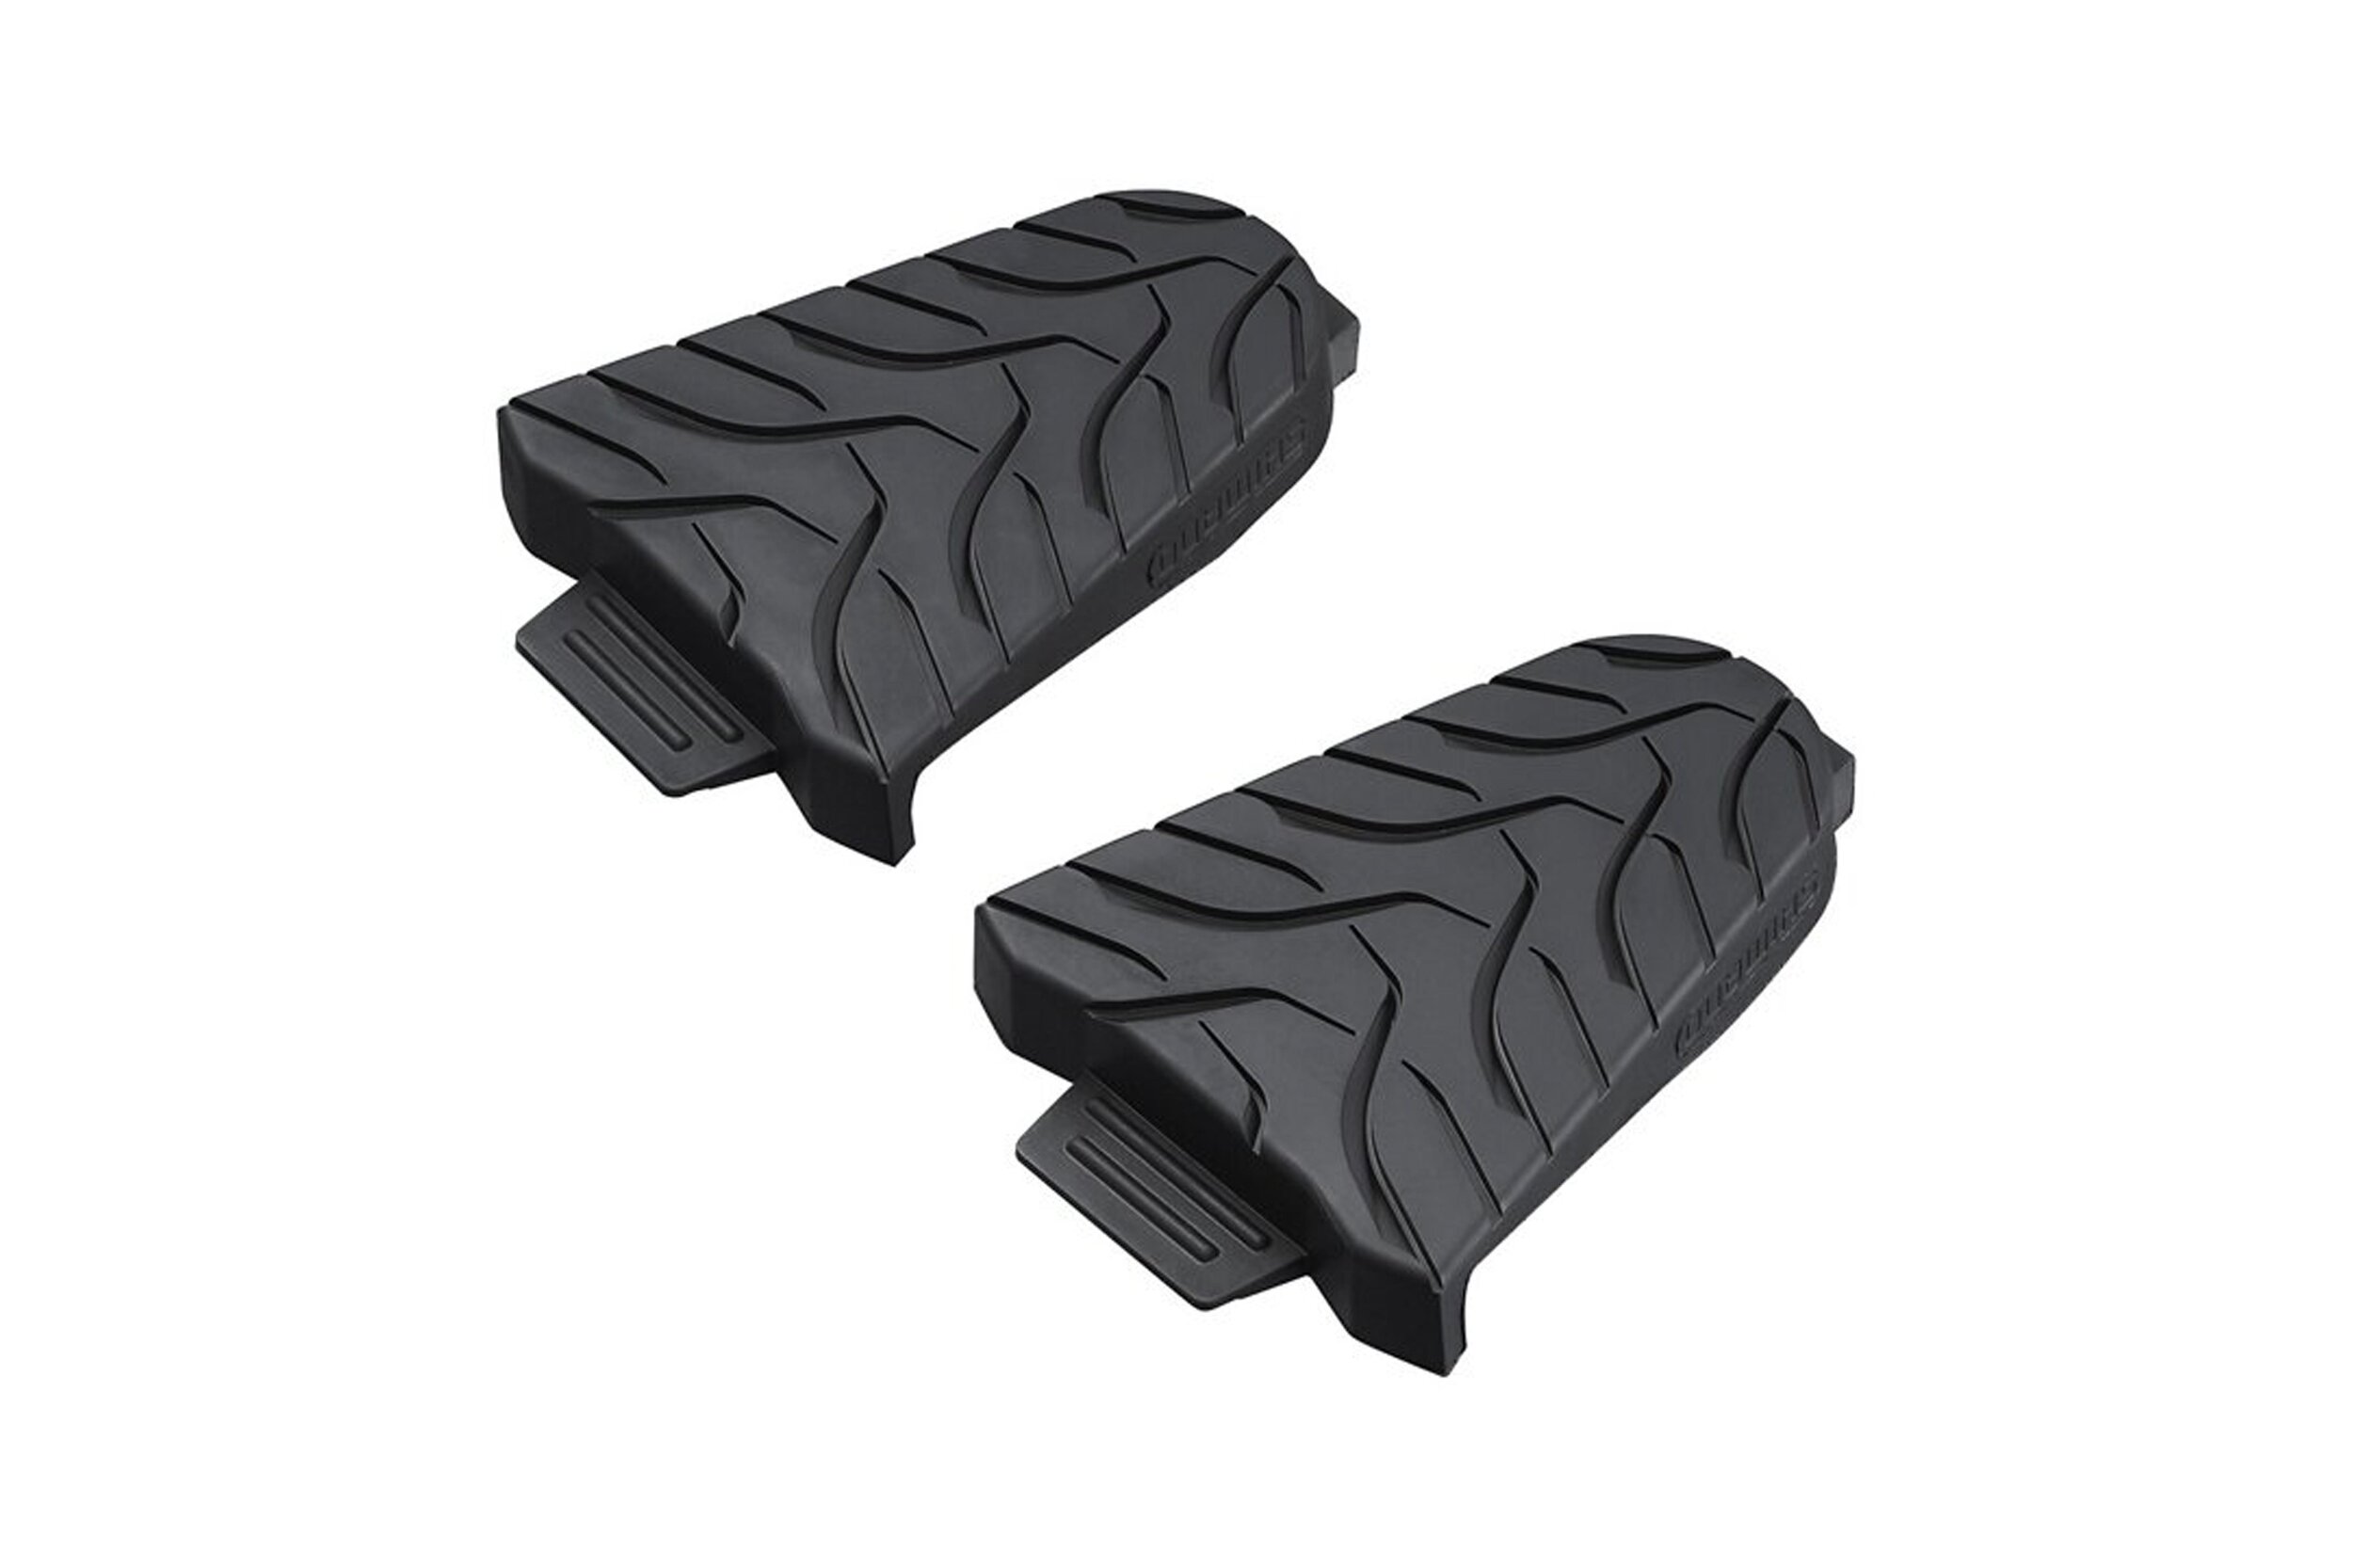 Details about   Shimano SPD-SL SM-SH45 Bike Cleat Cover Bicycle Shoe Cleat Cover Protector 1pair 